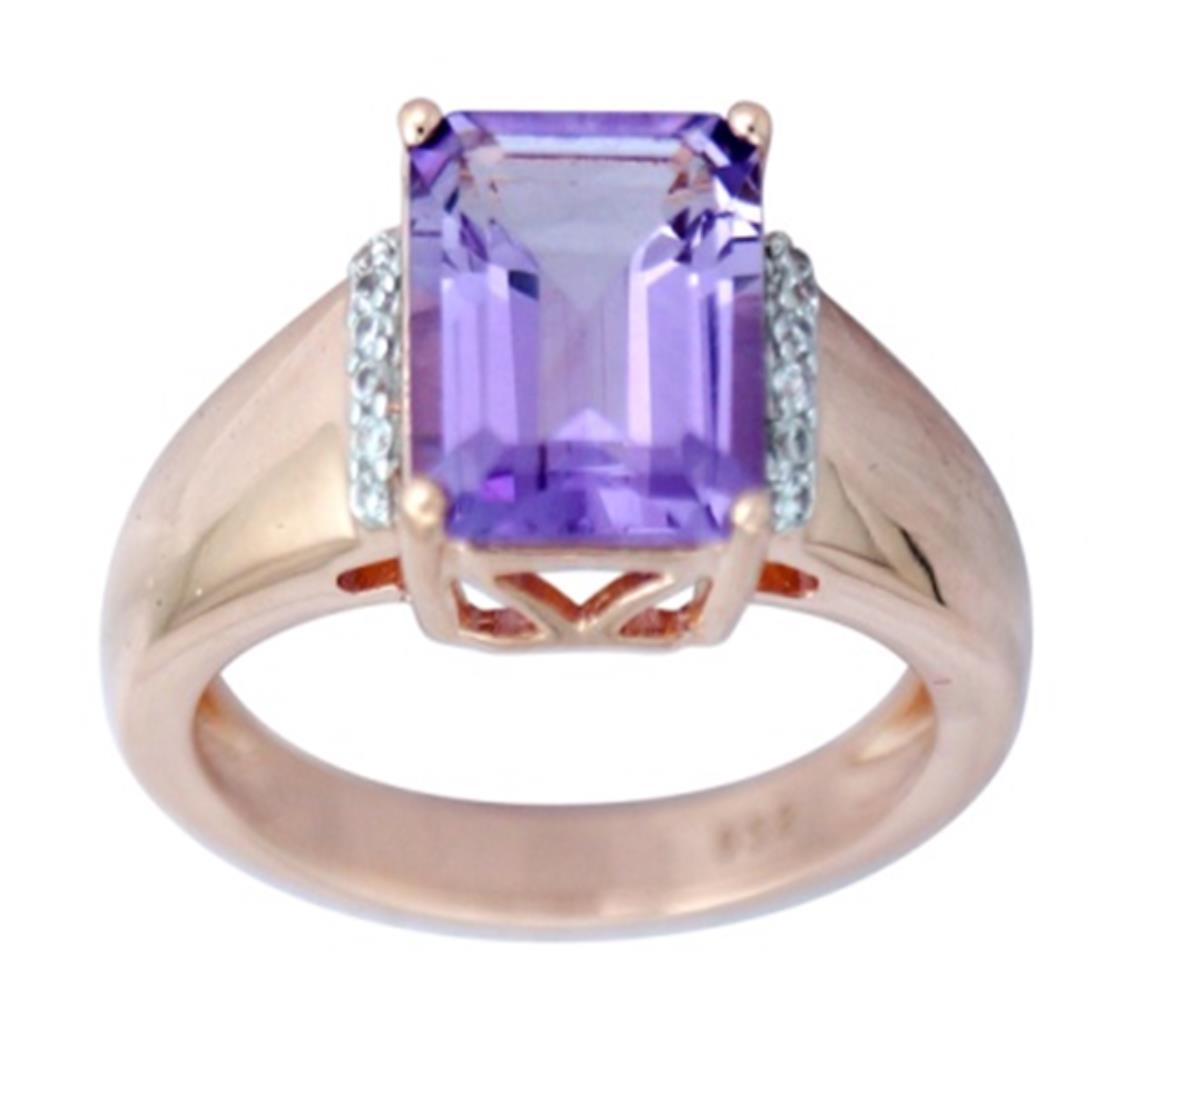 10K Rose Gold 10x8mm Emerald Cut Pink Amethyst & White Zircon Sides Engagement Ring